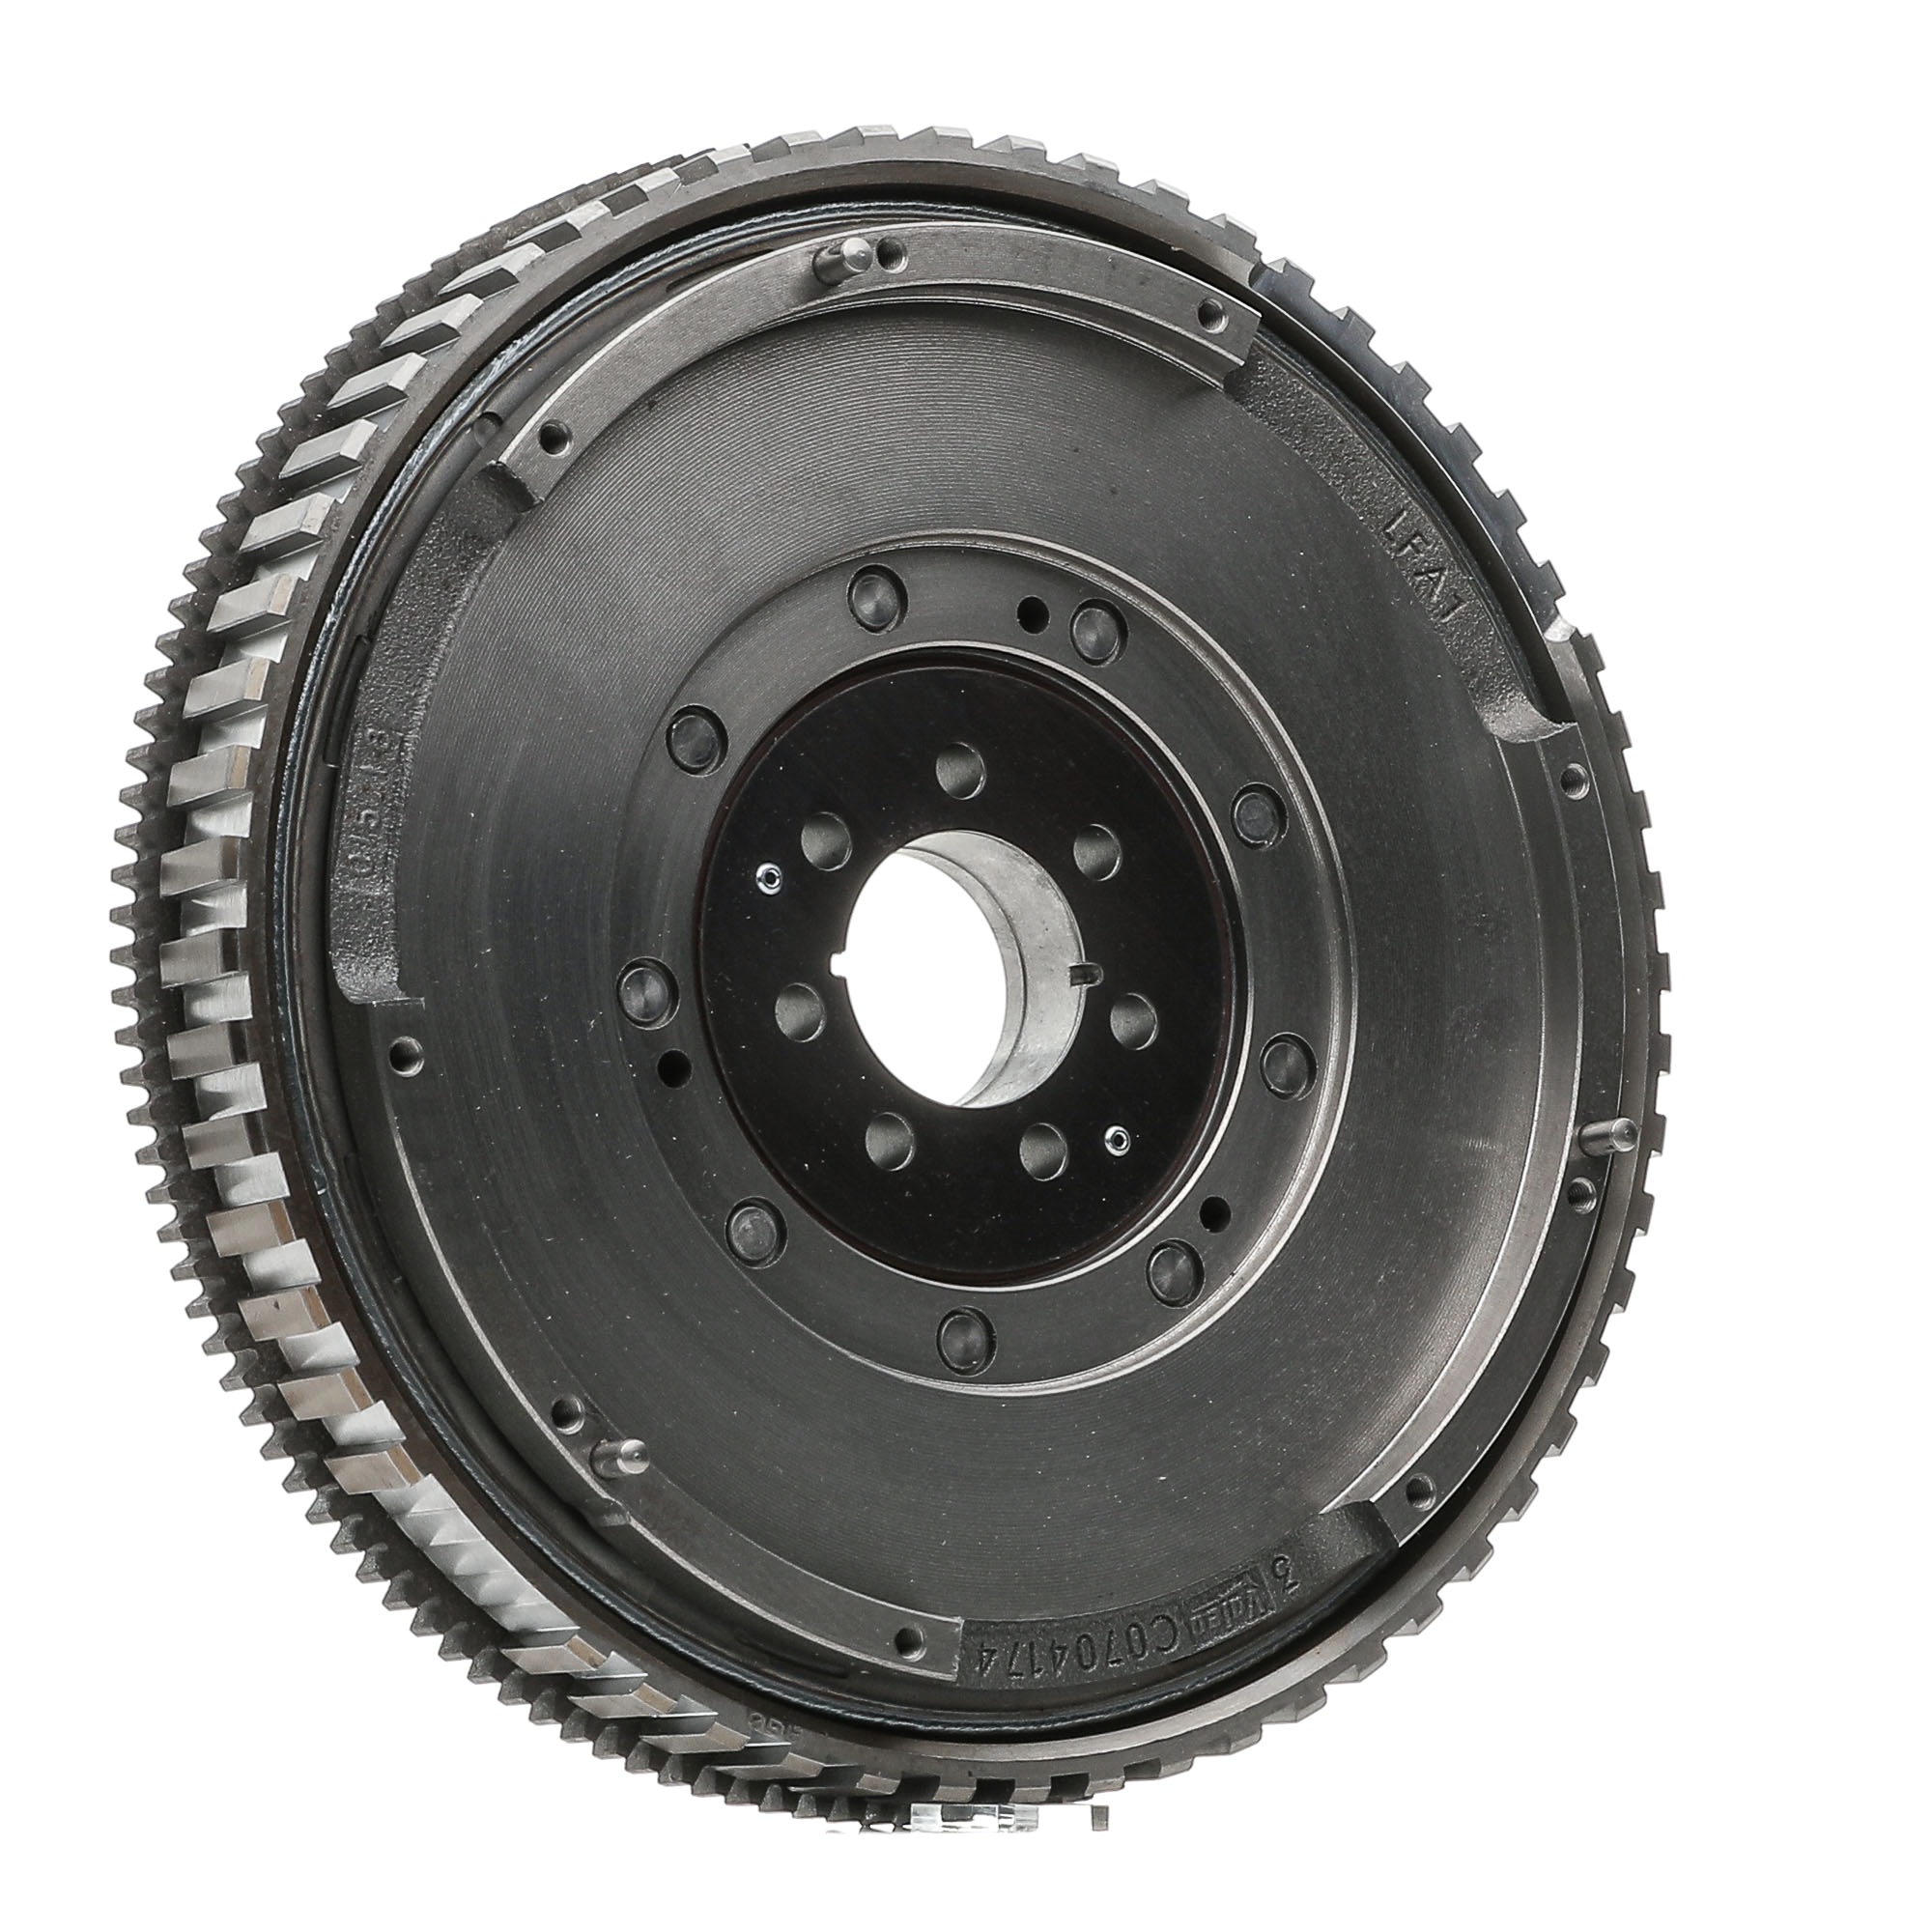 VALEO 836553 Dual mass flywheel RENAULT experience and price